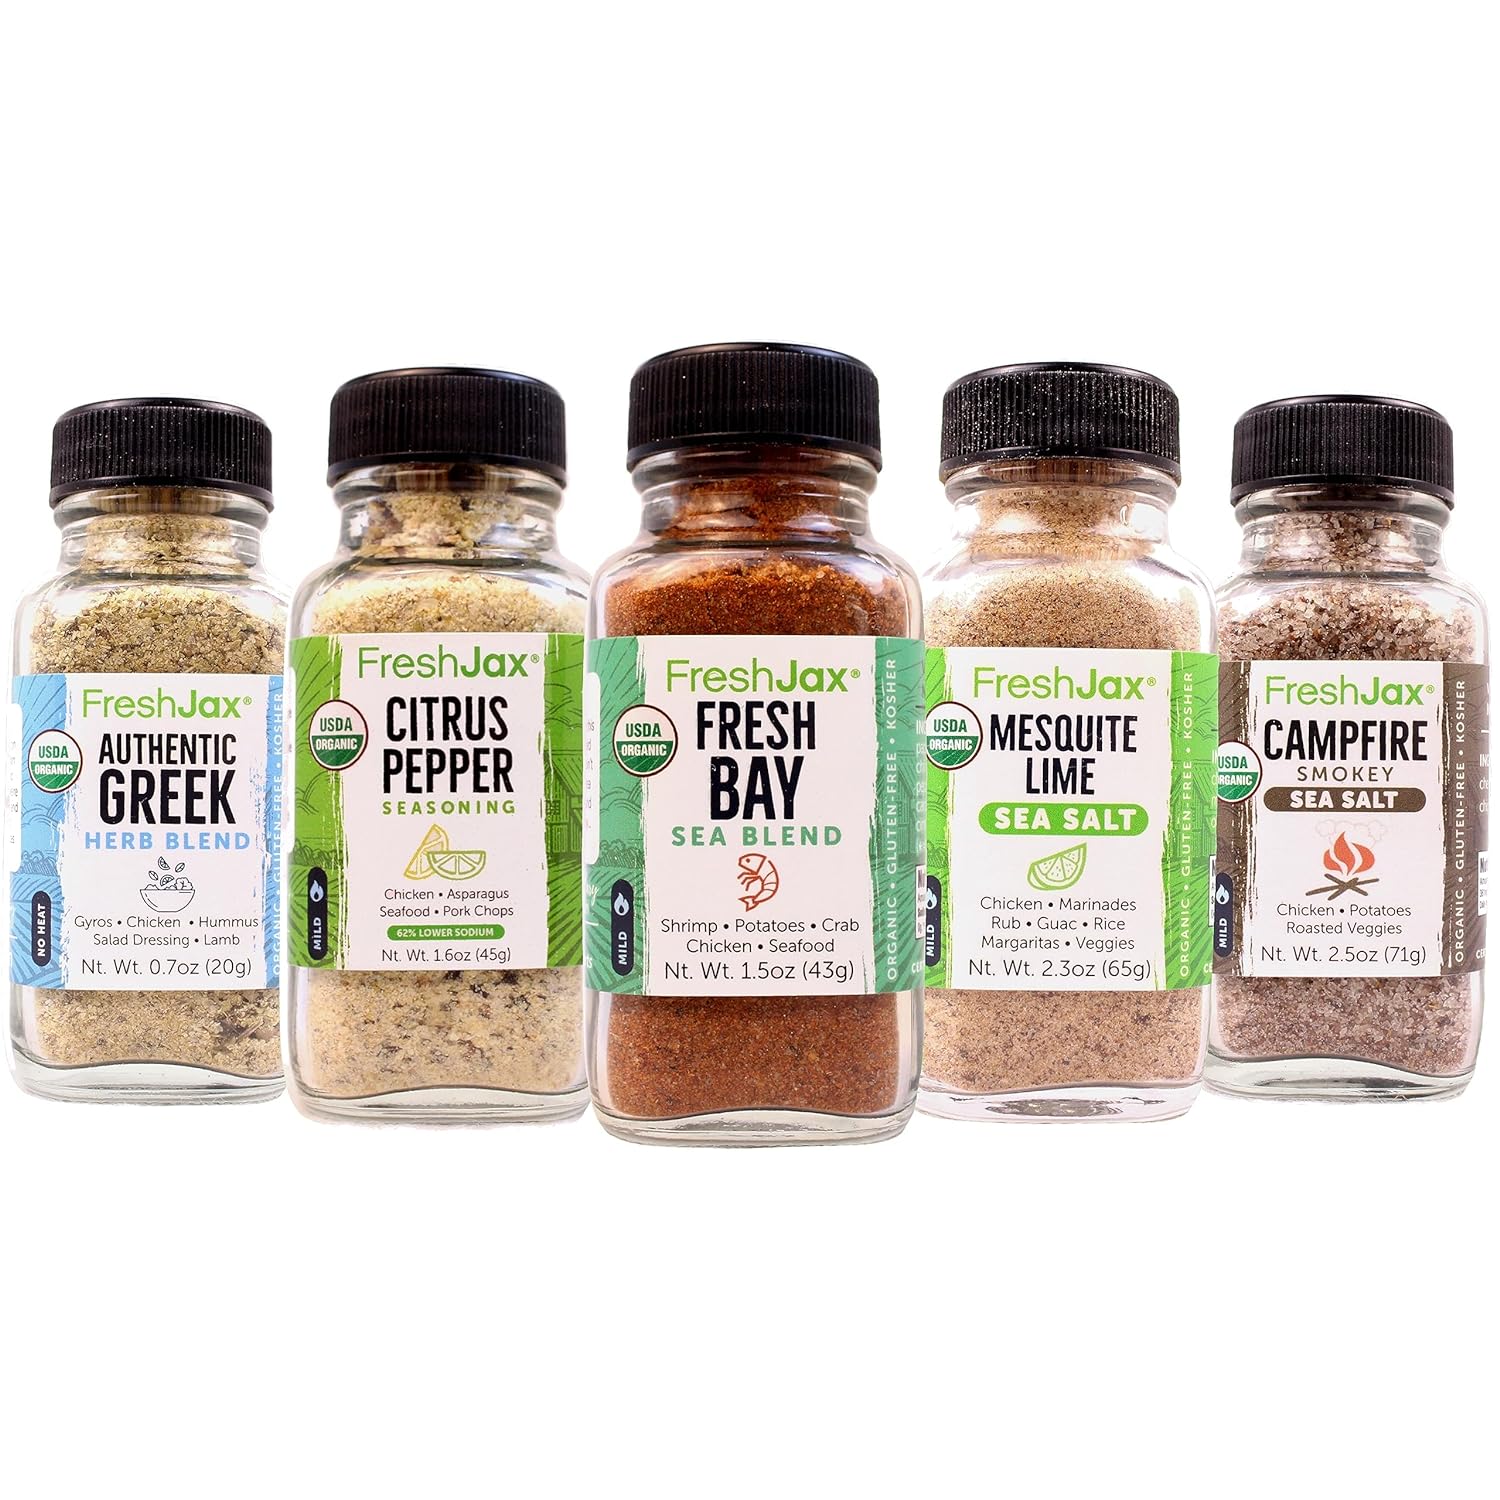 FreshJax Chicken Seasoning Gift Set | Pack of 5 Organic Spices and Seasonings | Grilling gifts for Dads, Father | Gourmet Seasoning Set Packed in a Giftable Box